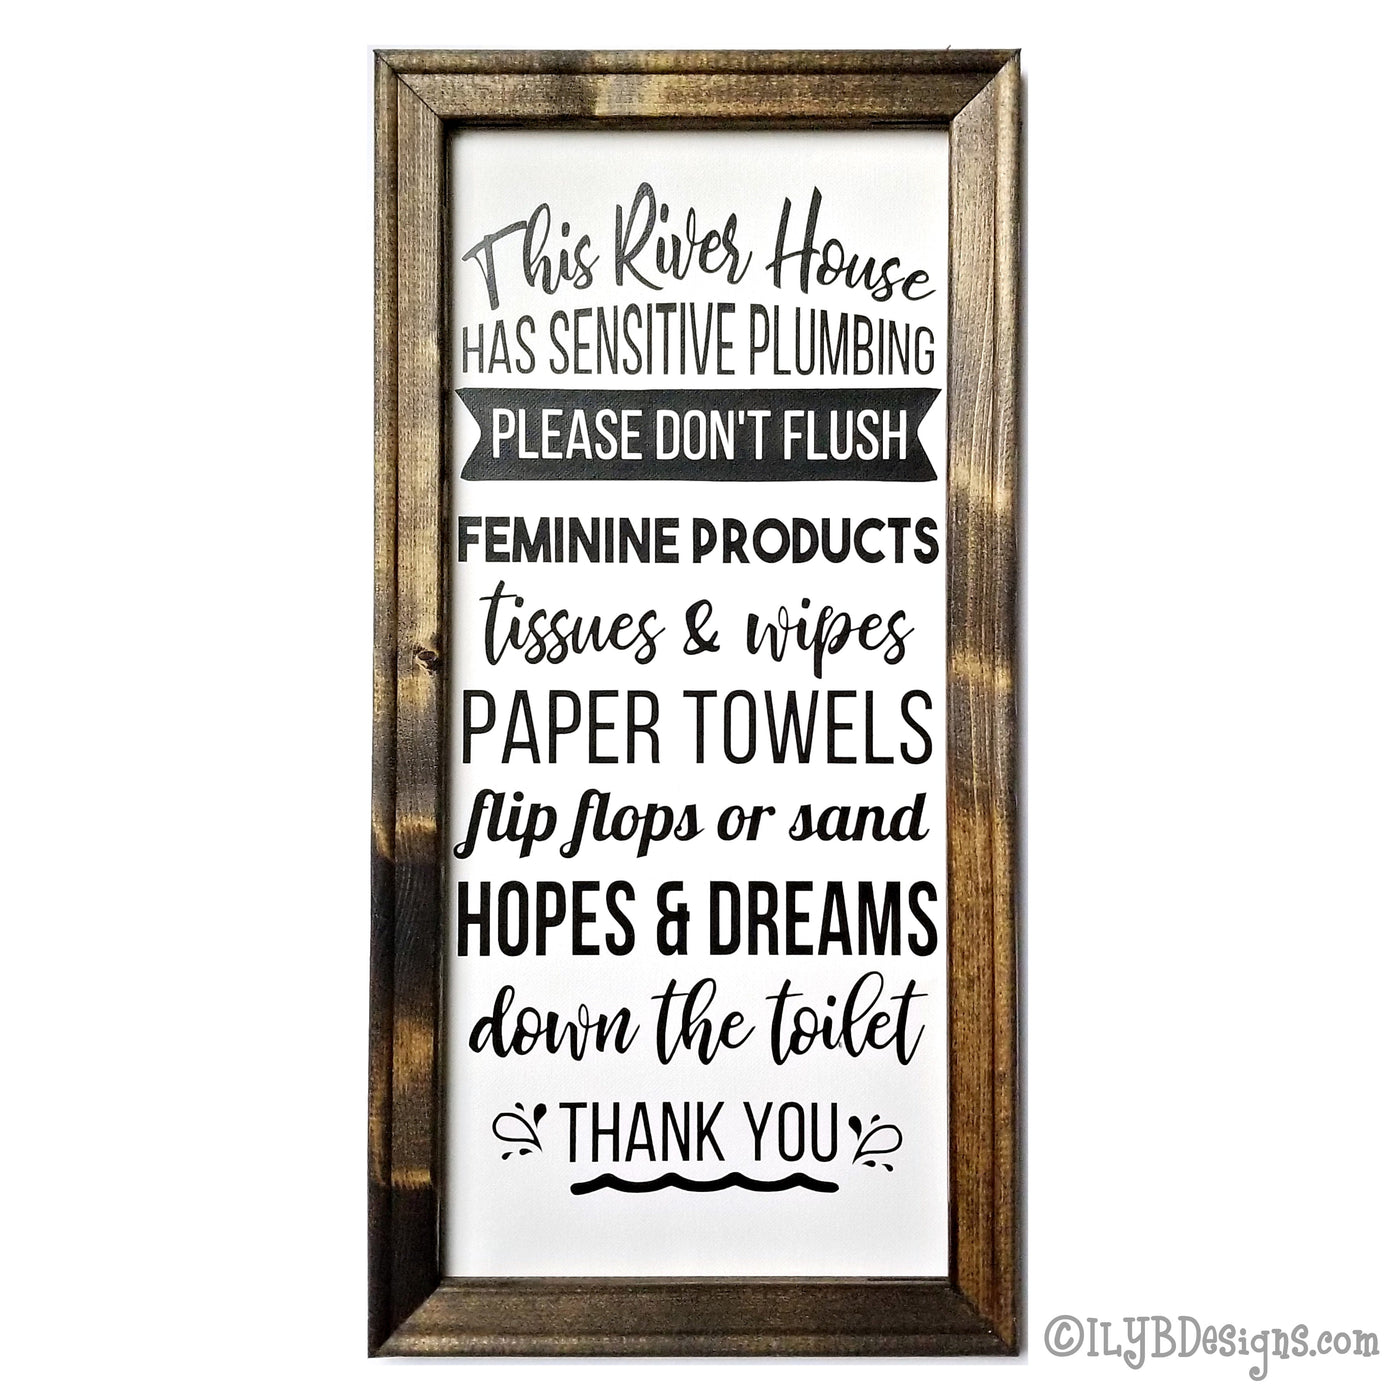 Dark walnut stained frame on a white canvas with a black design. The design is word art in various decorative fonts saying: This river house has sensitive plumbing. Please don't flush feminine products, tissues and wipes, paper towels, flip flops or sand, hopes and dreams down the toilet. Thank you. Sign measures 10"x20" and design is placed veritcally.